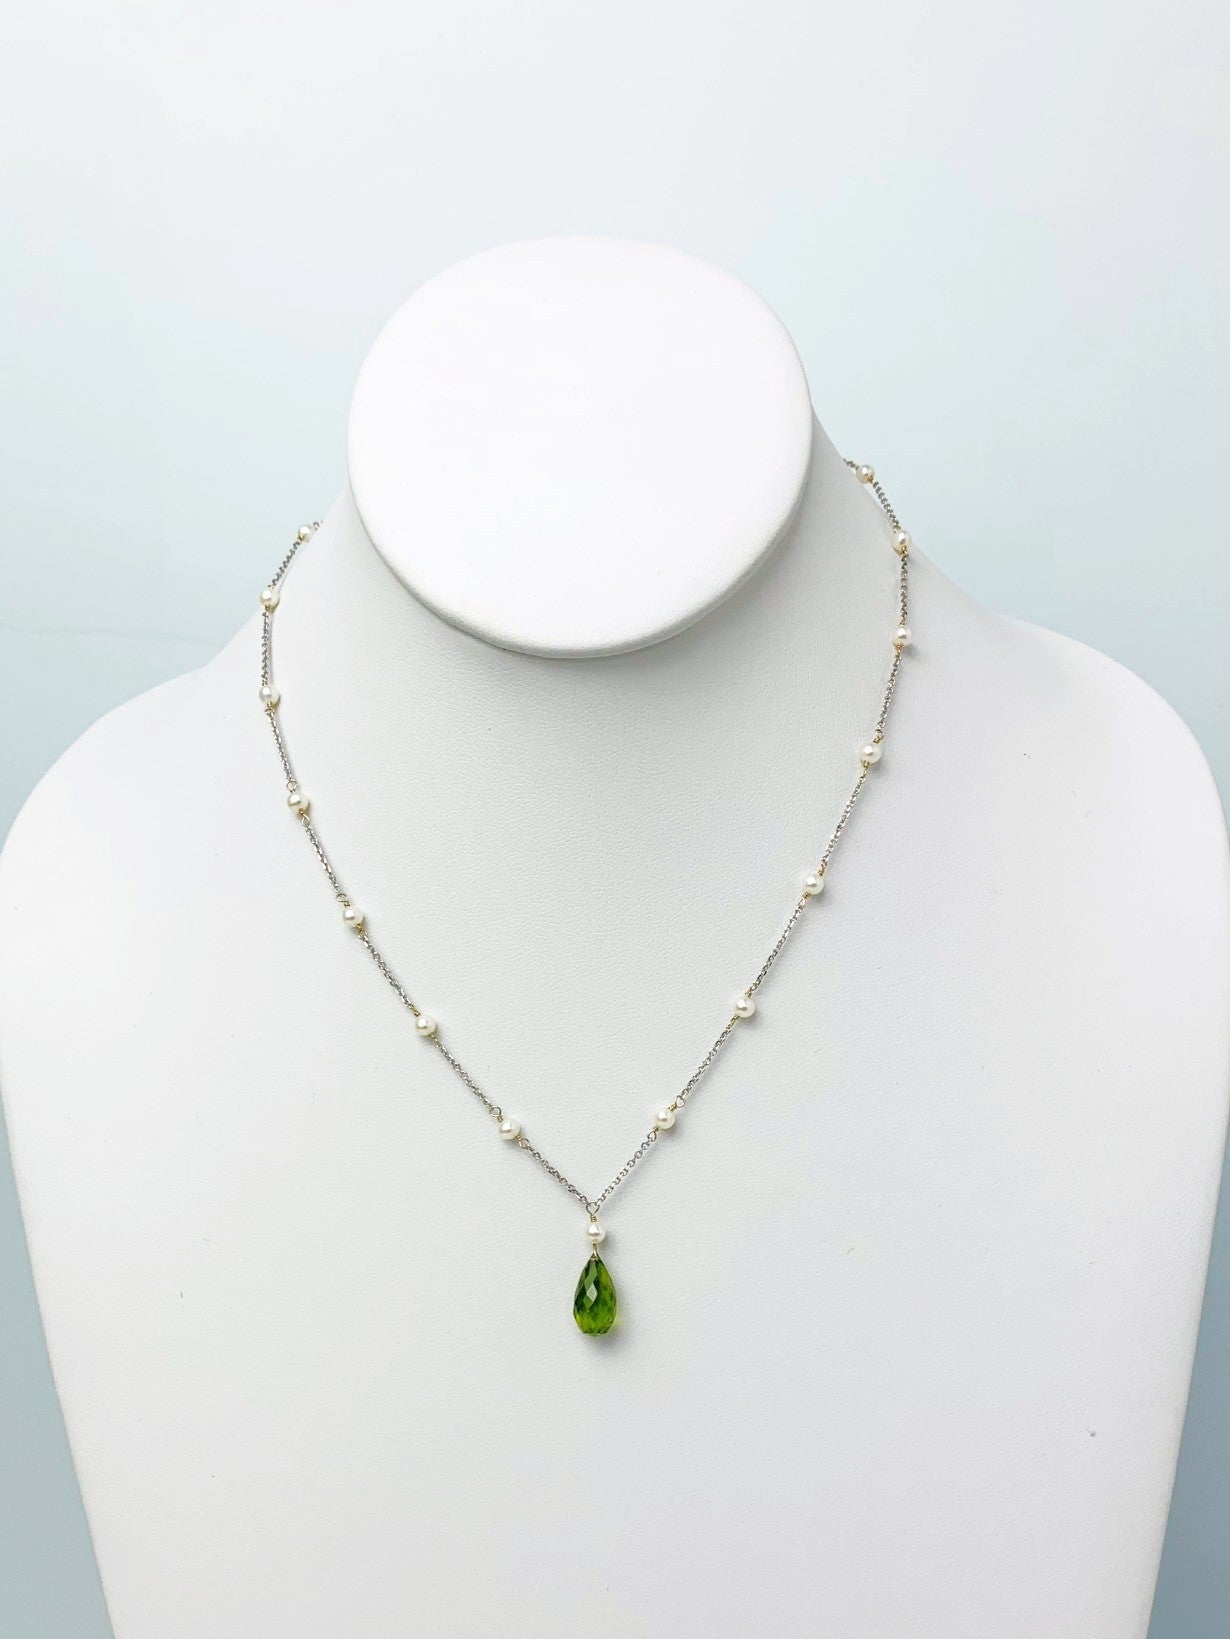 16" Peridot And Pearl Station Necklace With Center Drop in 14KW - NCK-495-DRPPRLGM14W-WHPDT-16